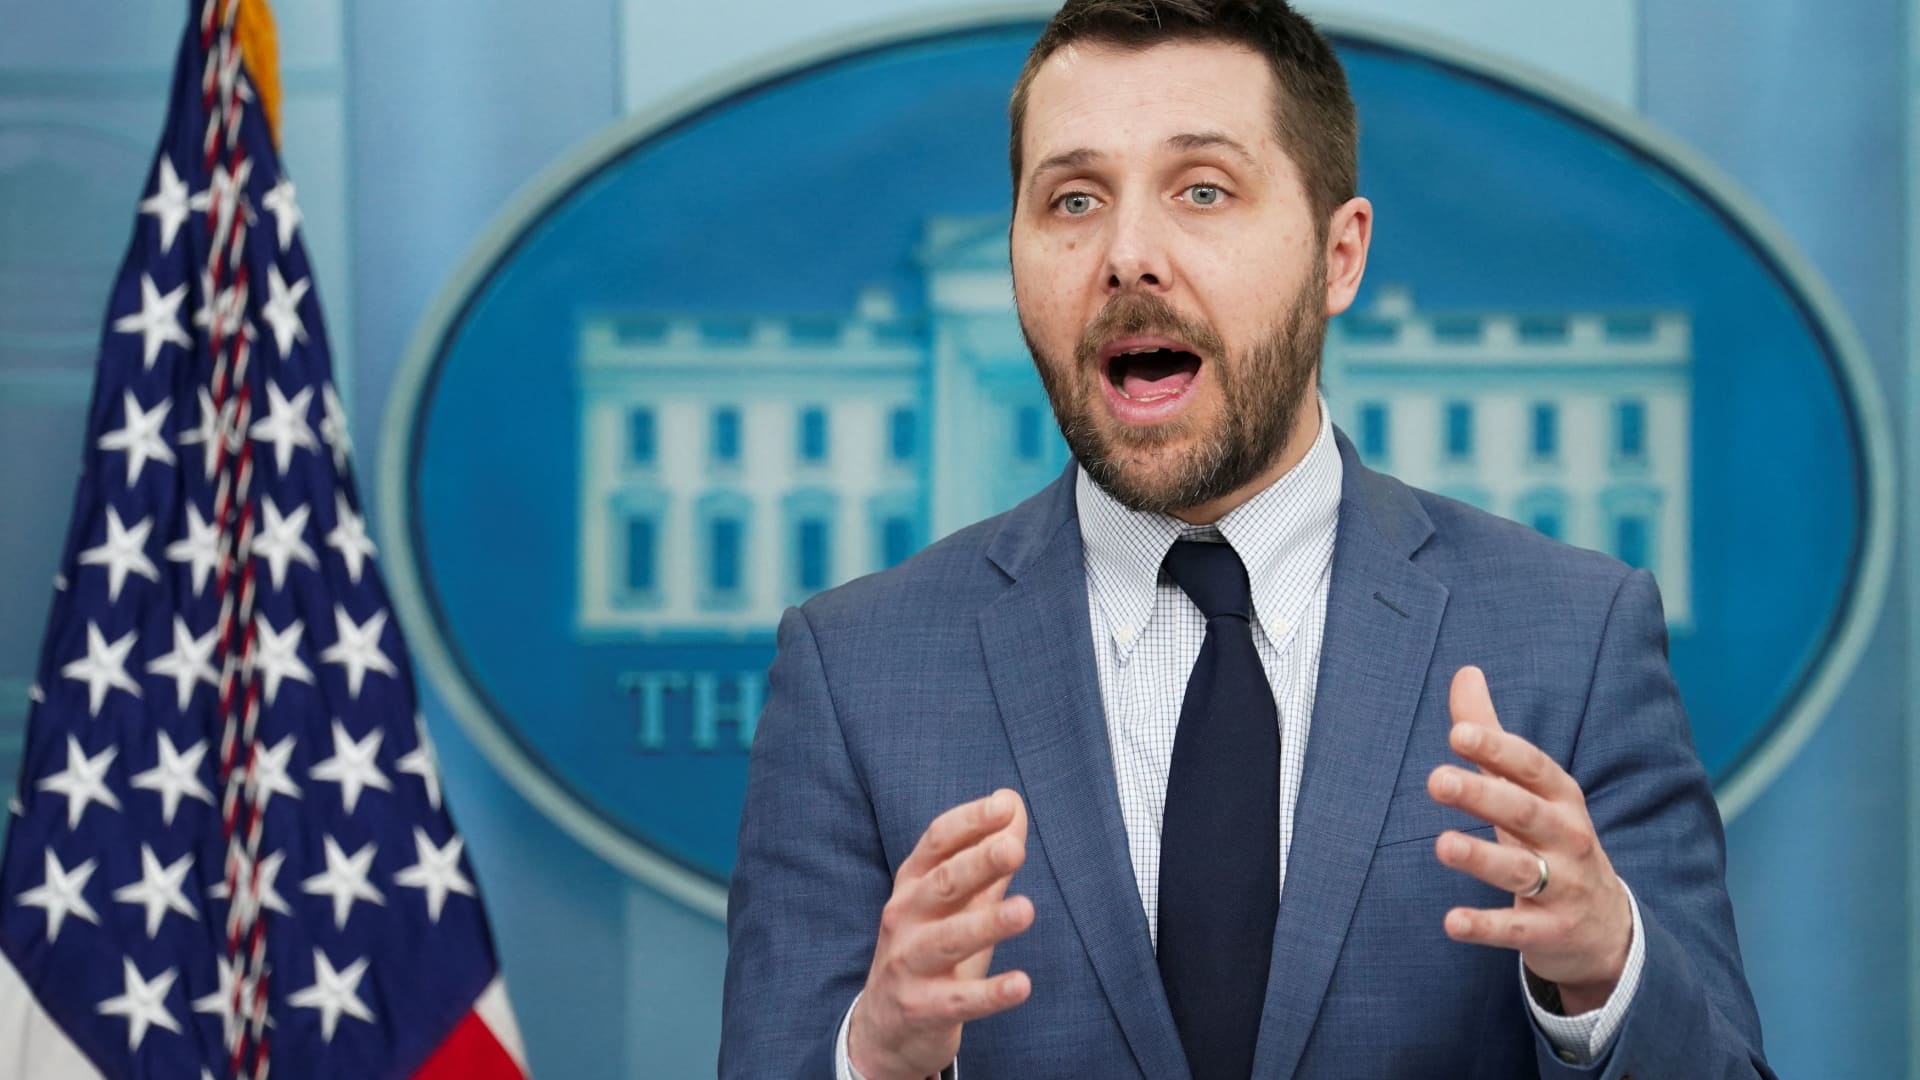 White House economic adviser Brian Deese speaks during a press briefing at the White House in Washington, March 31, 2022.